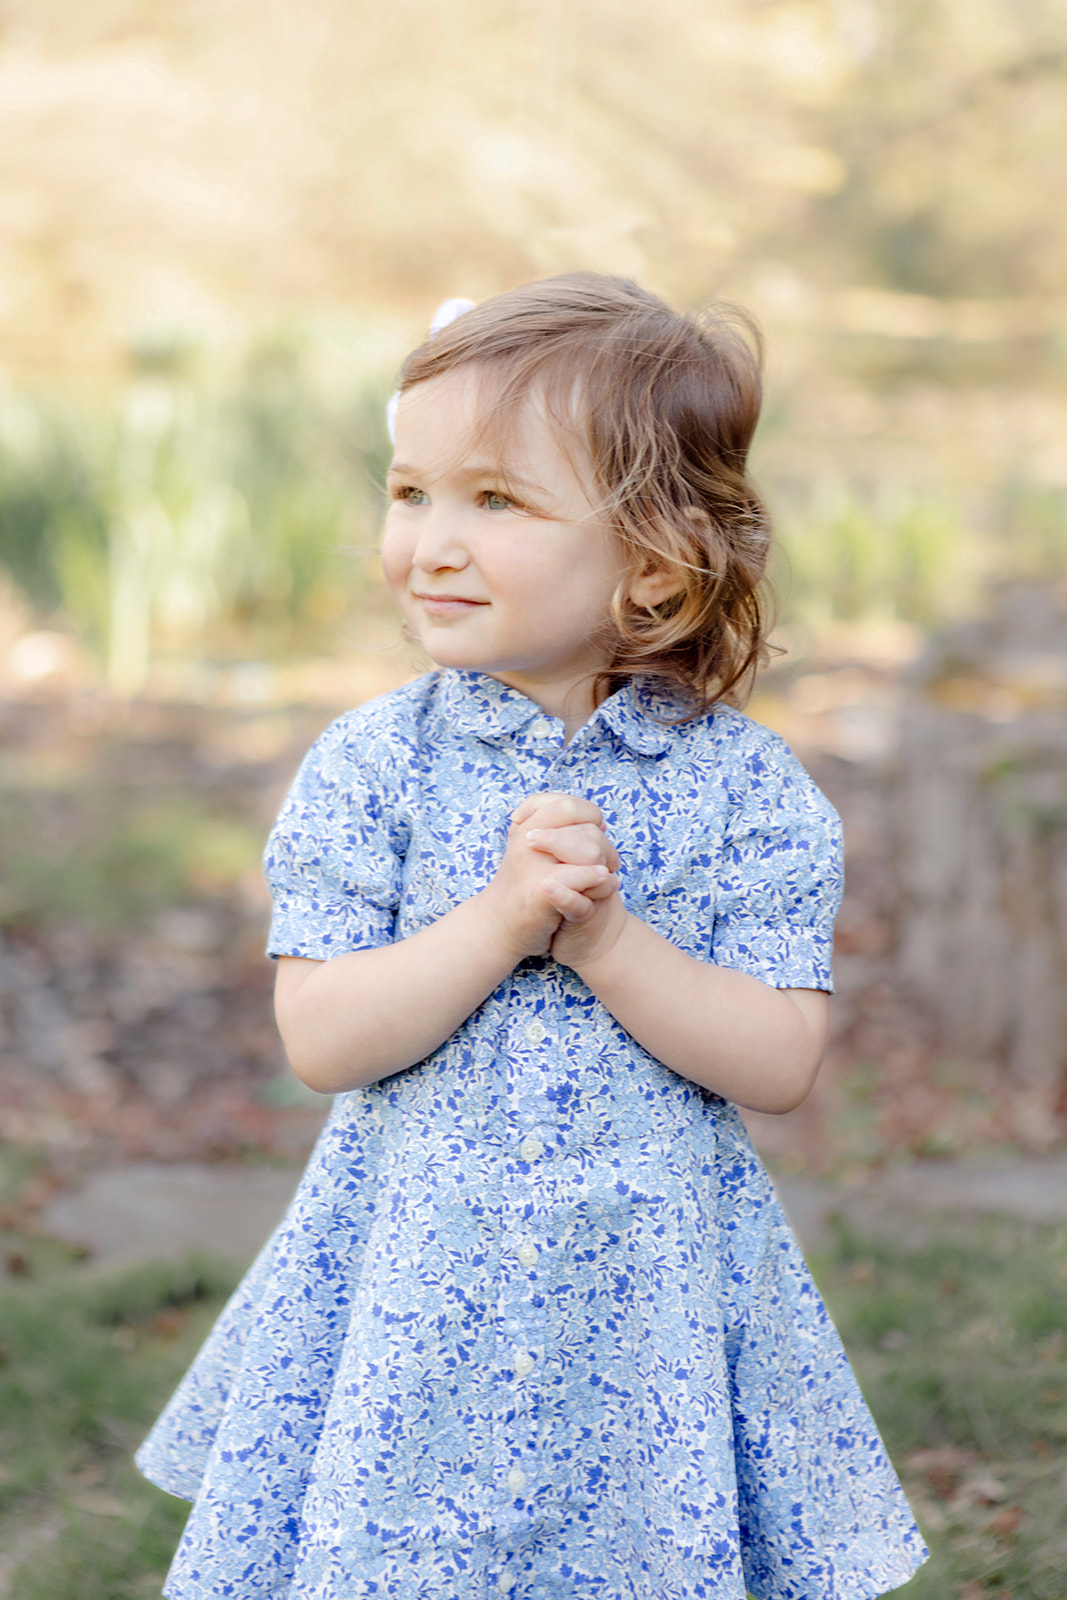 A classic childhood portrait of Lilah Sachs, pictured with her hands clasped in front of her, her wispy toddler curls blowing in the breeze. Lilah looks off camera with a whimsical expression, and wears a blue ditsy floral print dress.